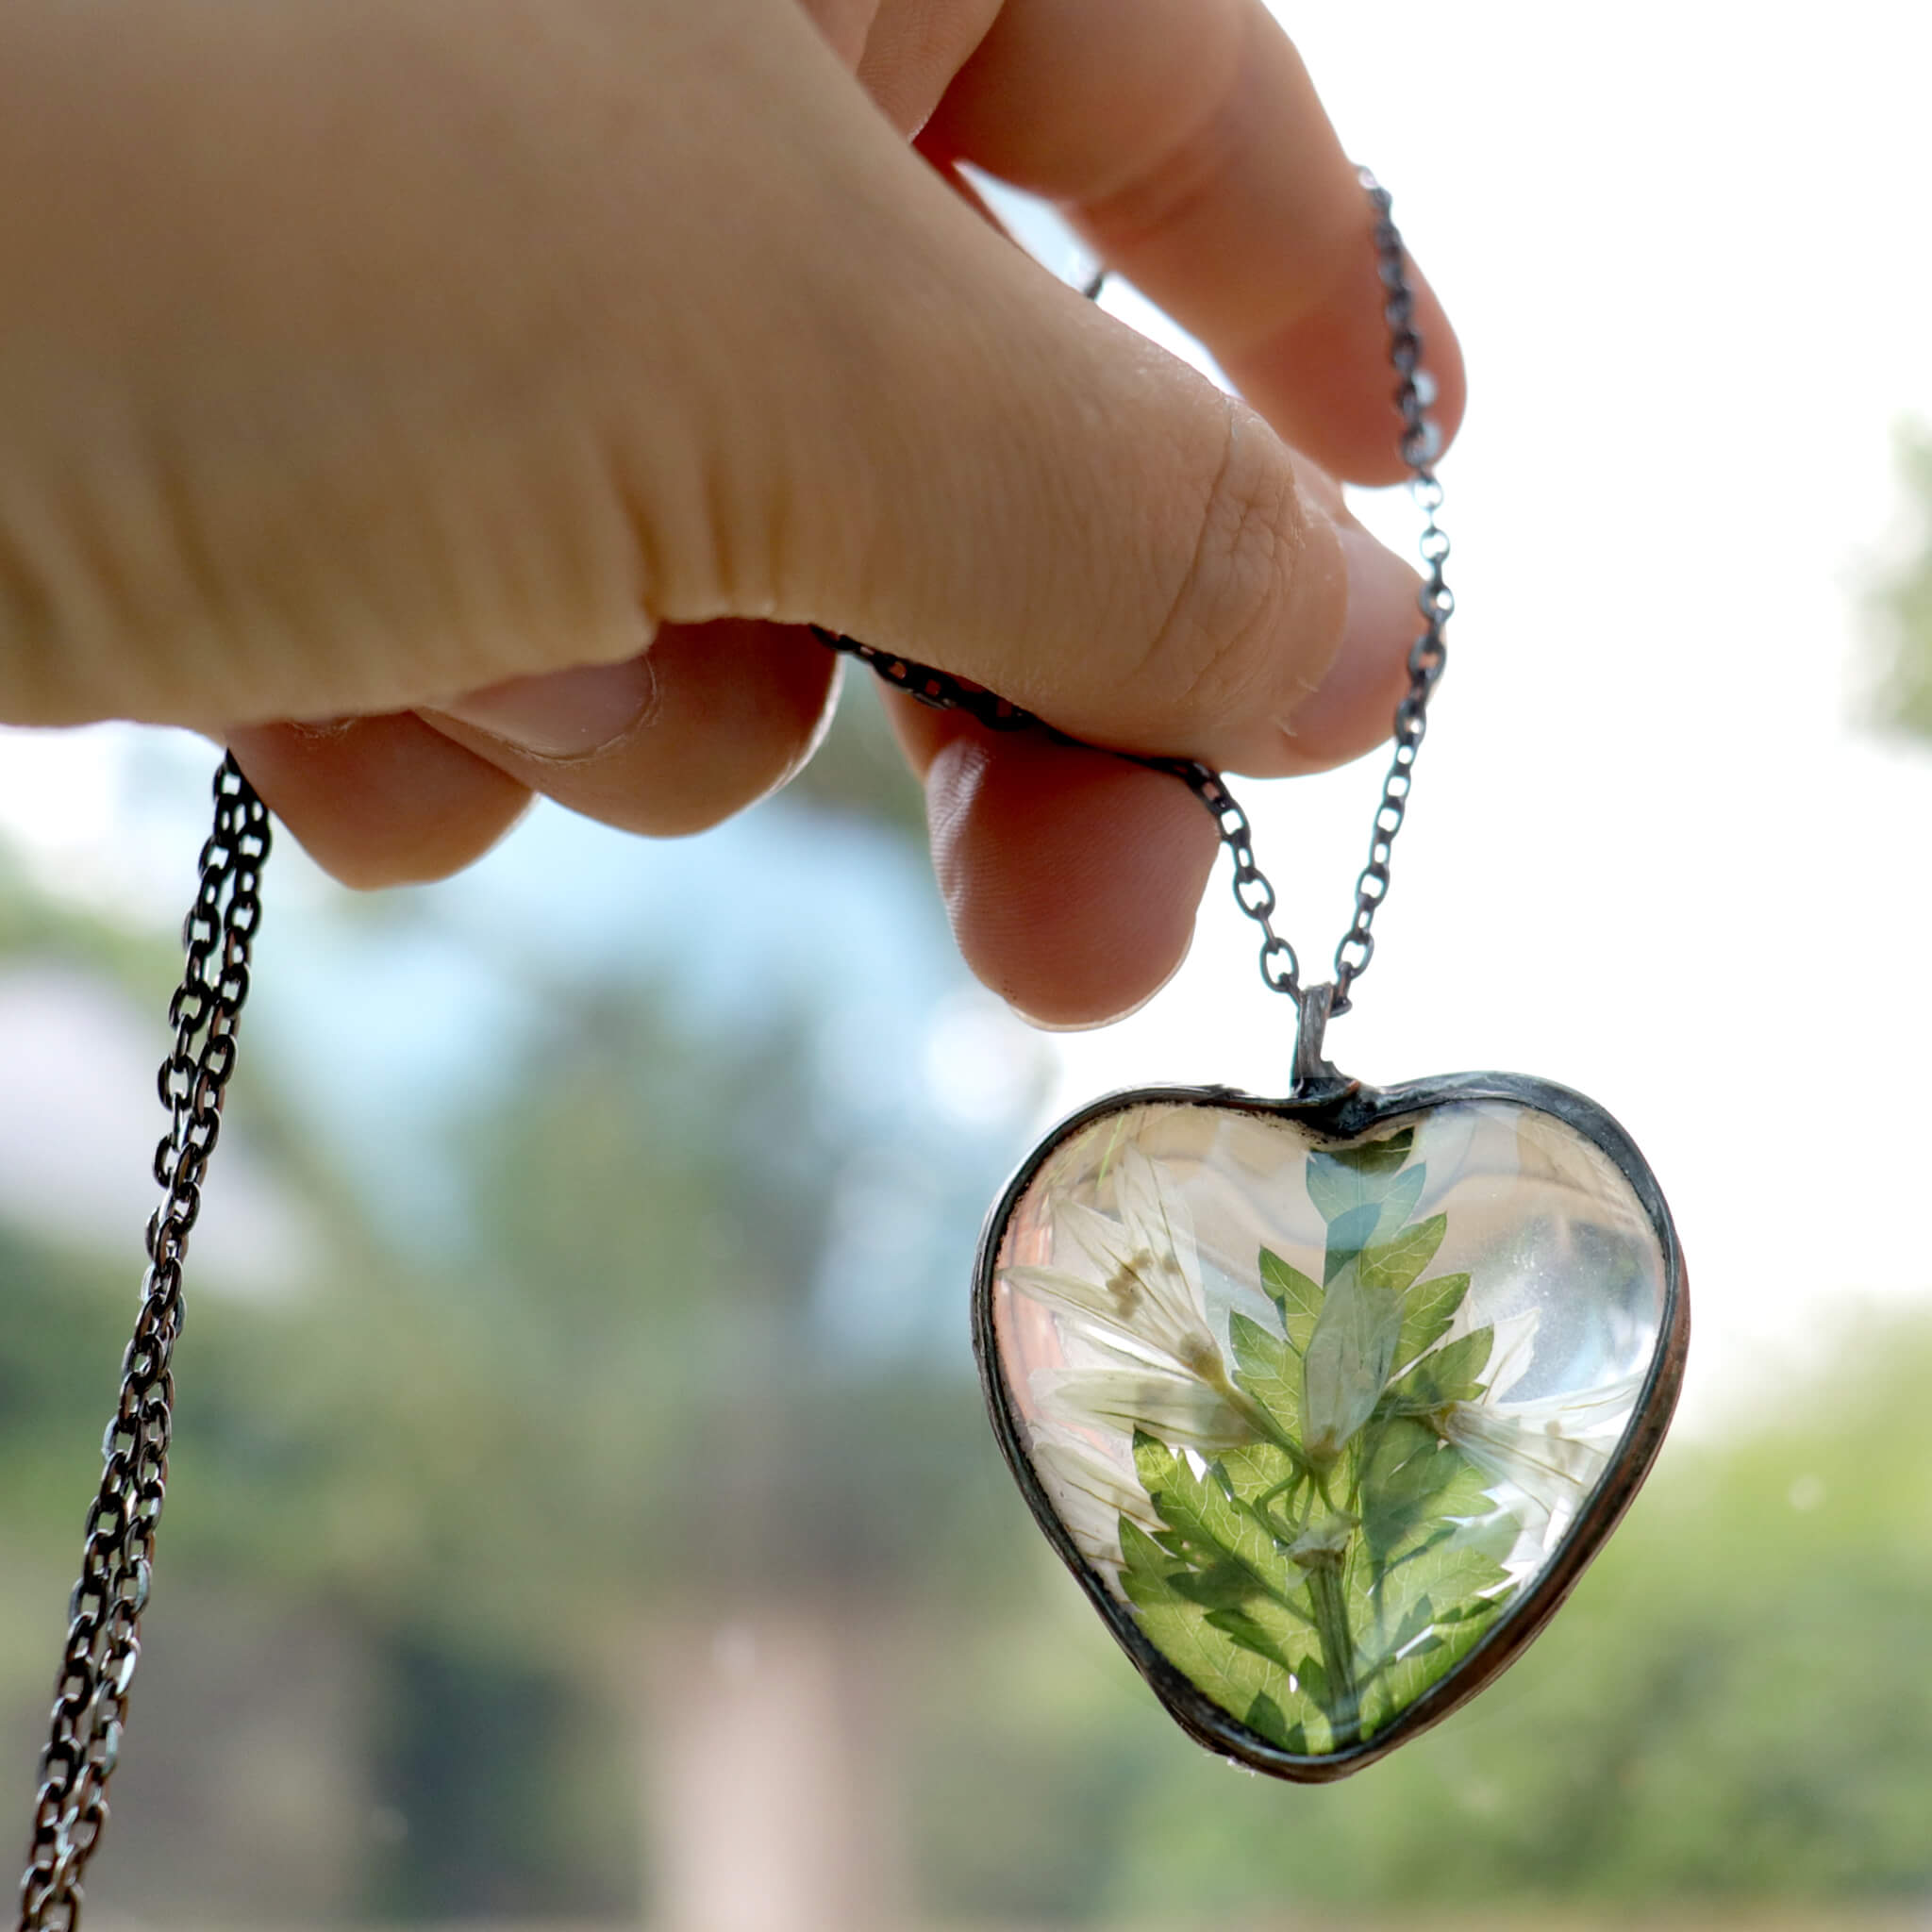 Hand holding Heart shaped necklace with pressed flowers in focus blurry background